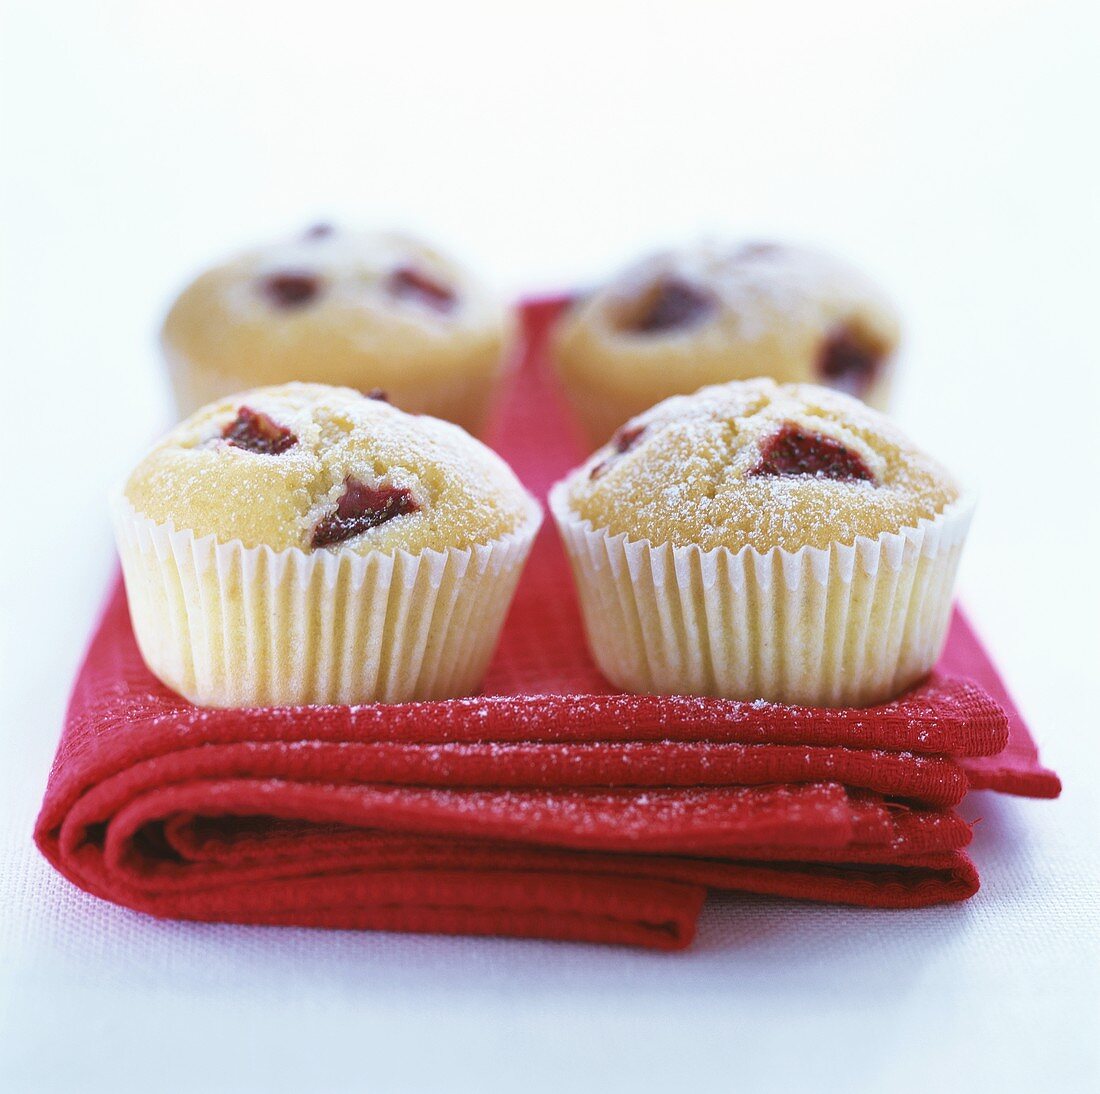 Four muffins in paper cases on red cloth